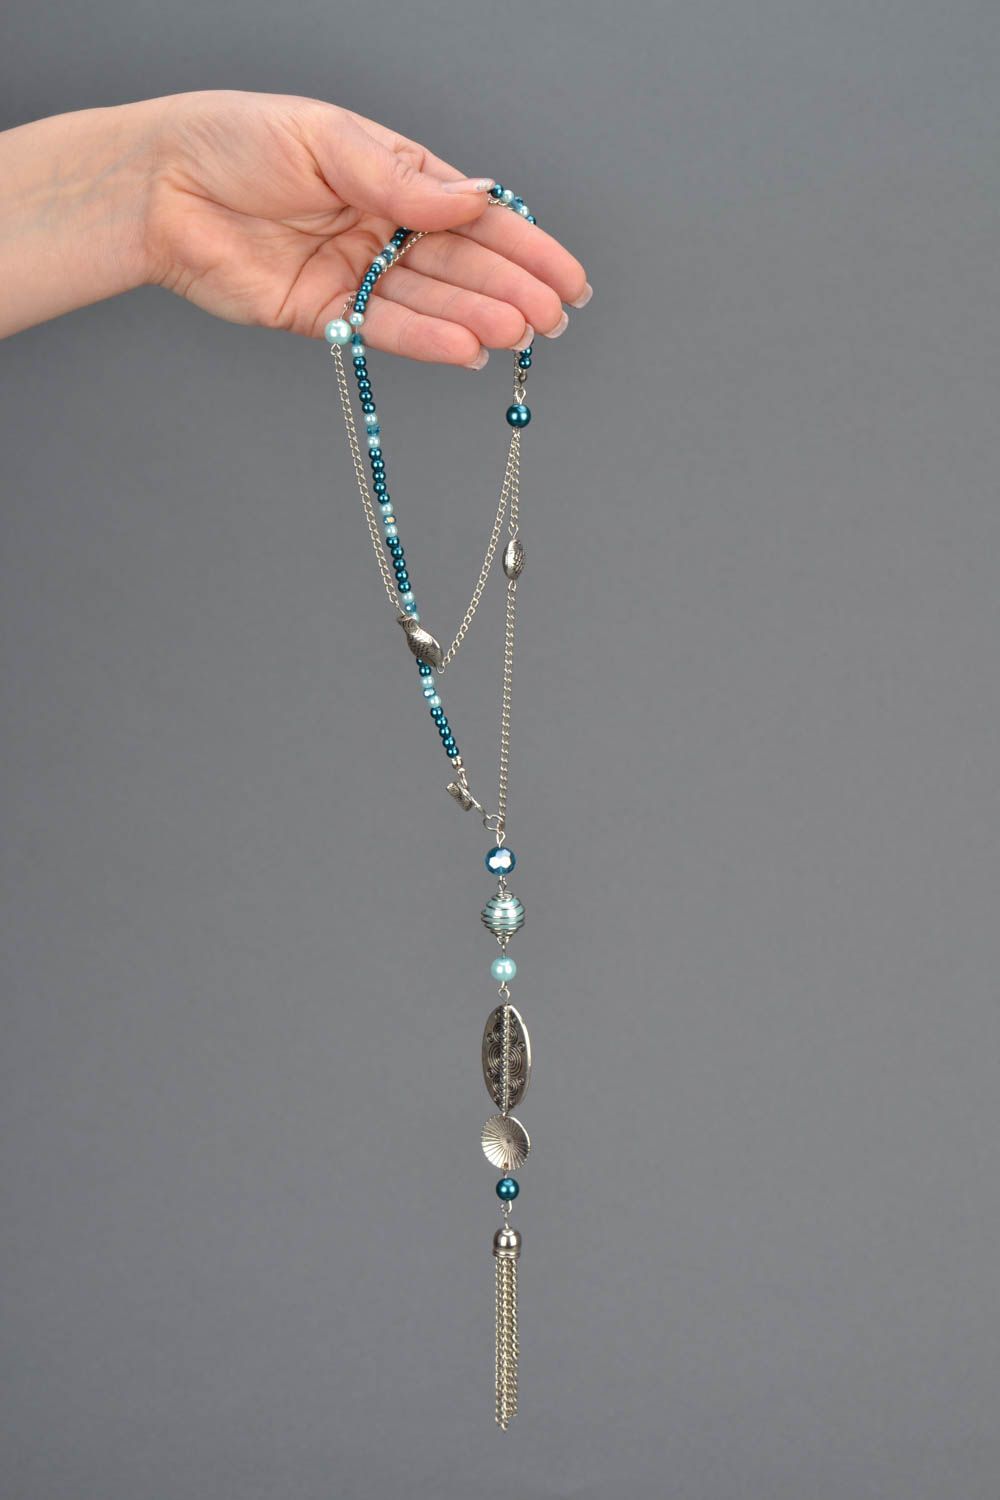 Necklace made of beads and metal photo 2